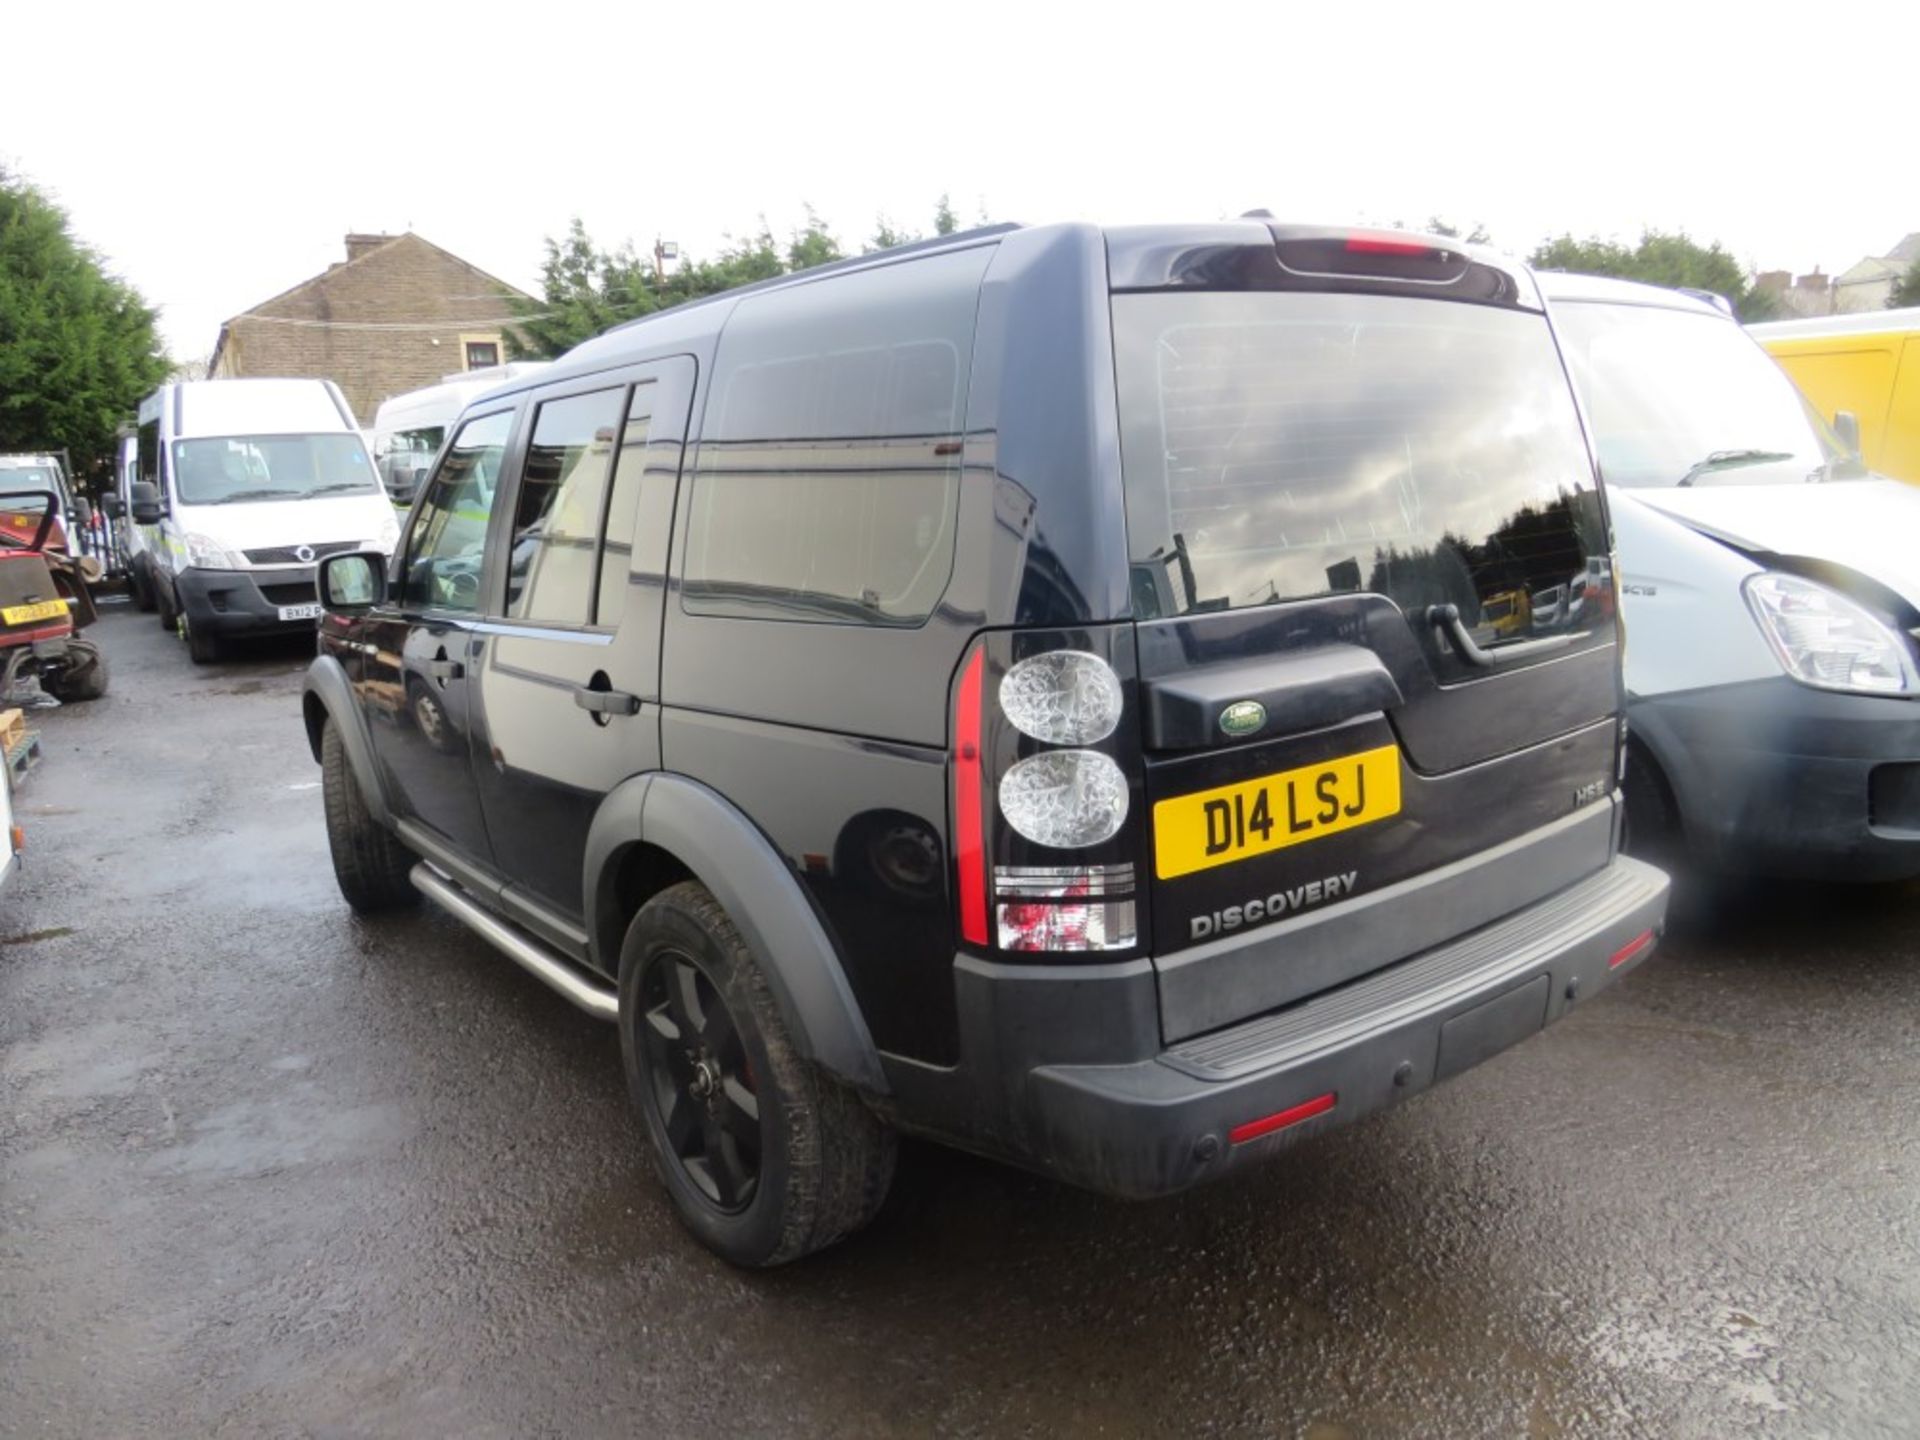 2007 LANDROVER DISCOVERY TDV6 HSE, 1ST REG 05/07, TEST 12/20, 128158M NOT WARRANTED, V5 HERE, 5 - Image 3 of 5